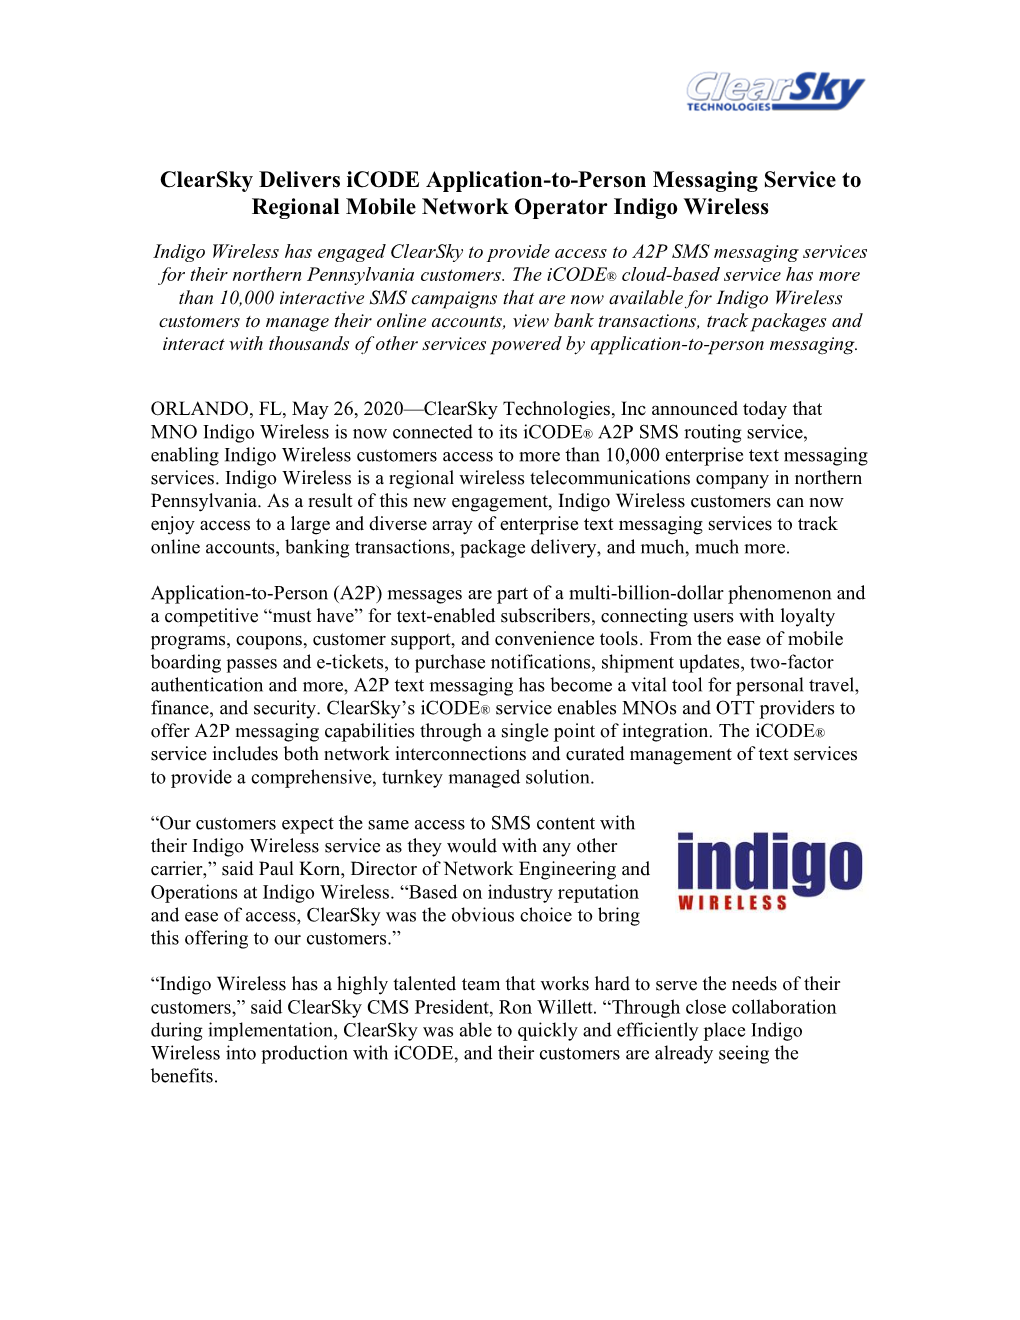 Clearsky Delivers Icode Application-To-Person Messaging Service to Regional Mobile Network Operator Indigo Wireless